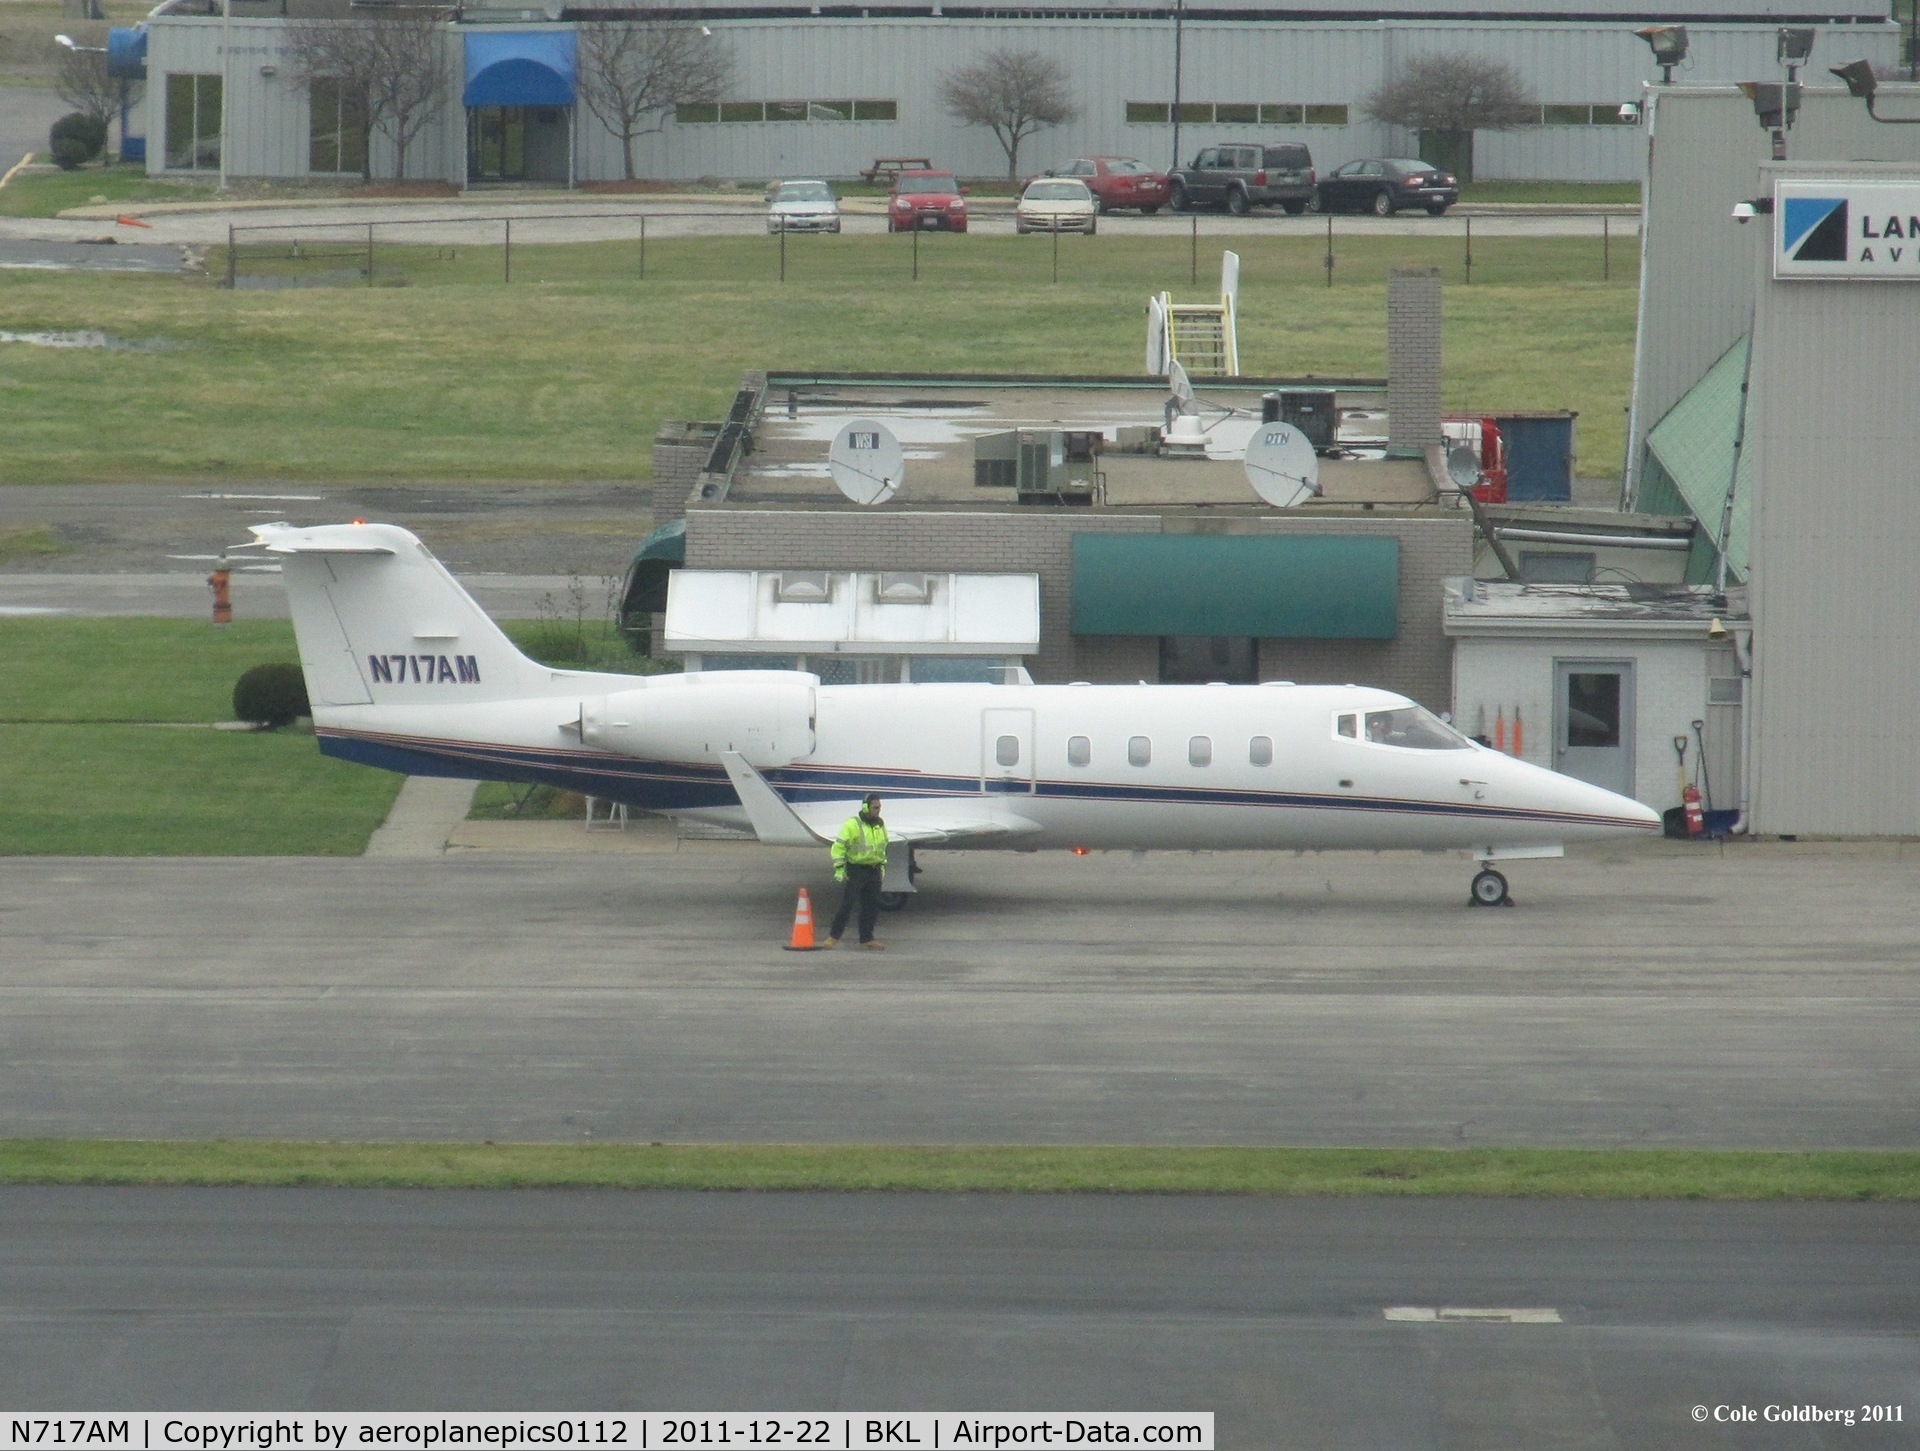 N717AM, 1984 Gates Learjet 55 C/N 100, N717AM seen from the control tower at KBKL, a few minute after arrival.